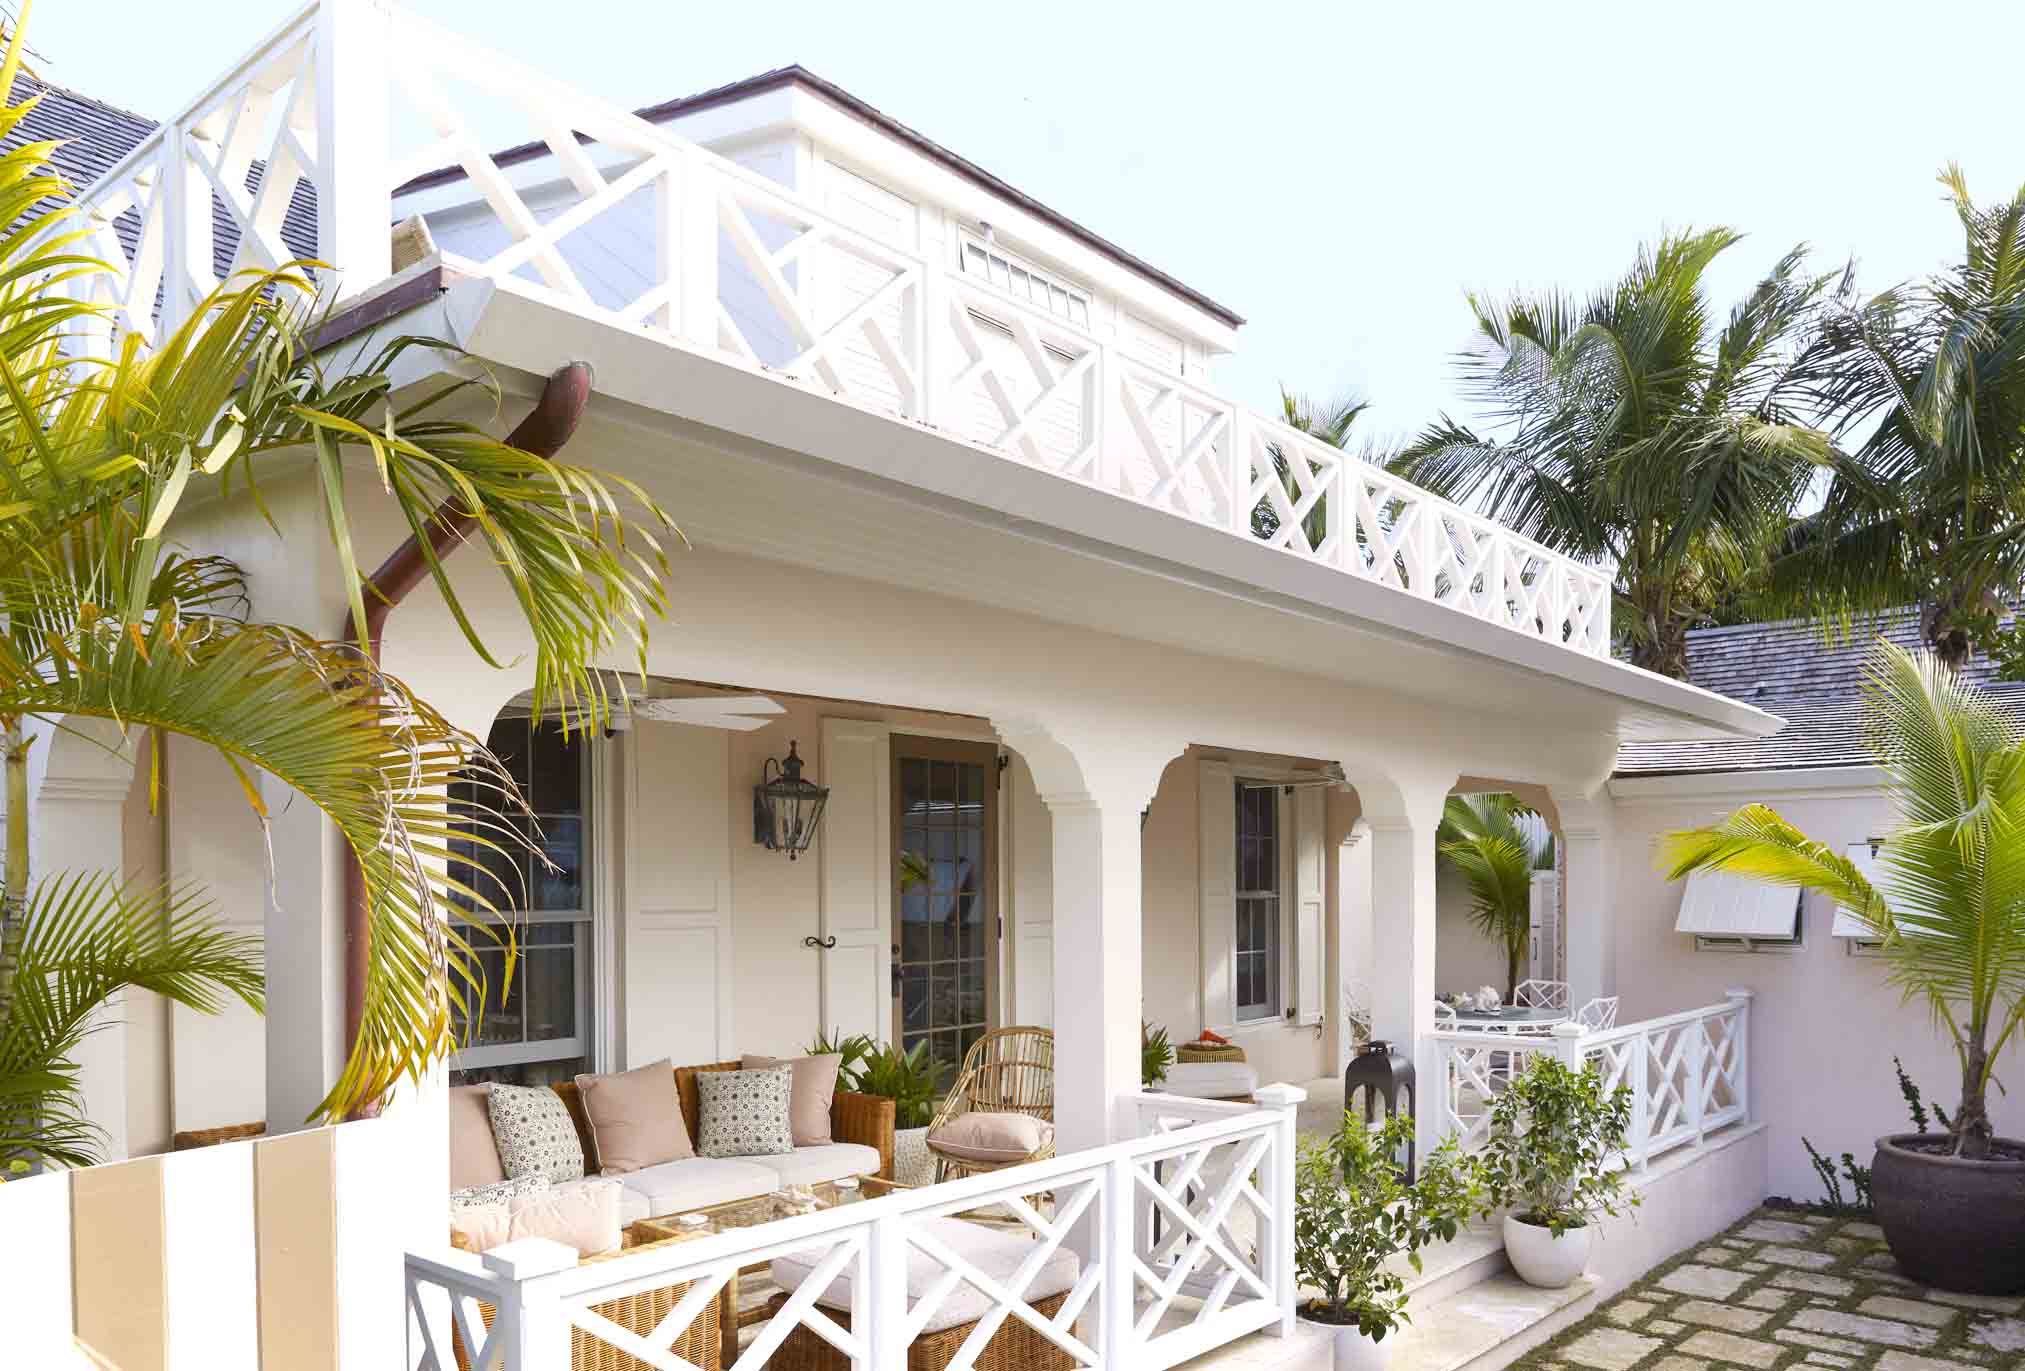 a shell pink cottage in a tropical setting with white chippendale railings